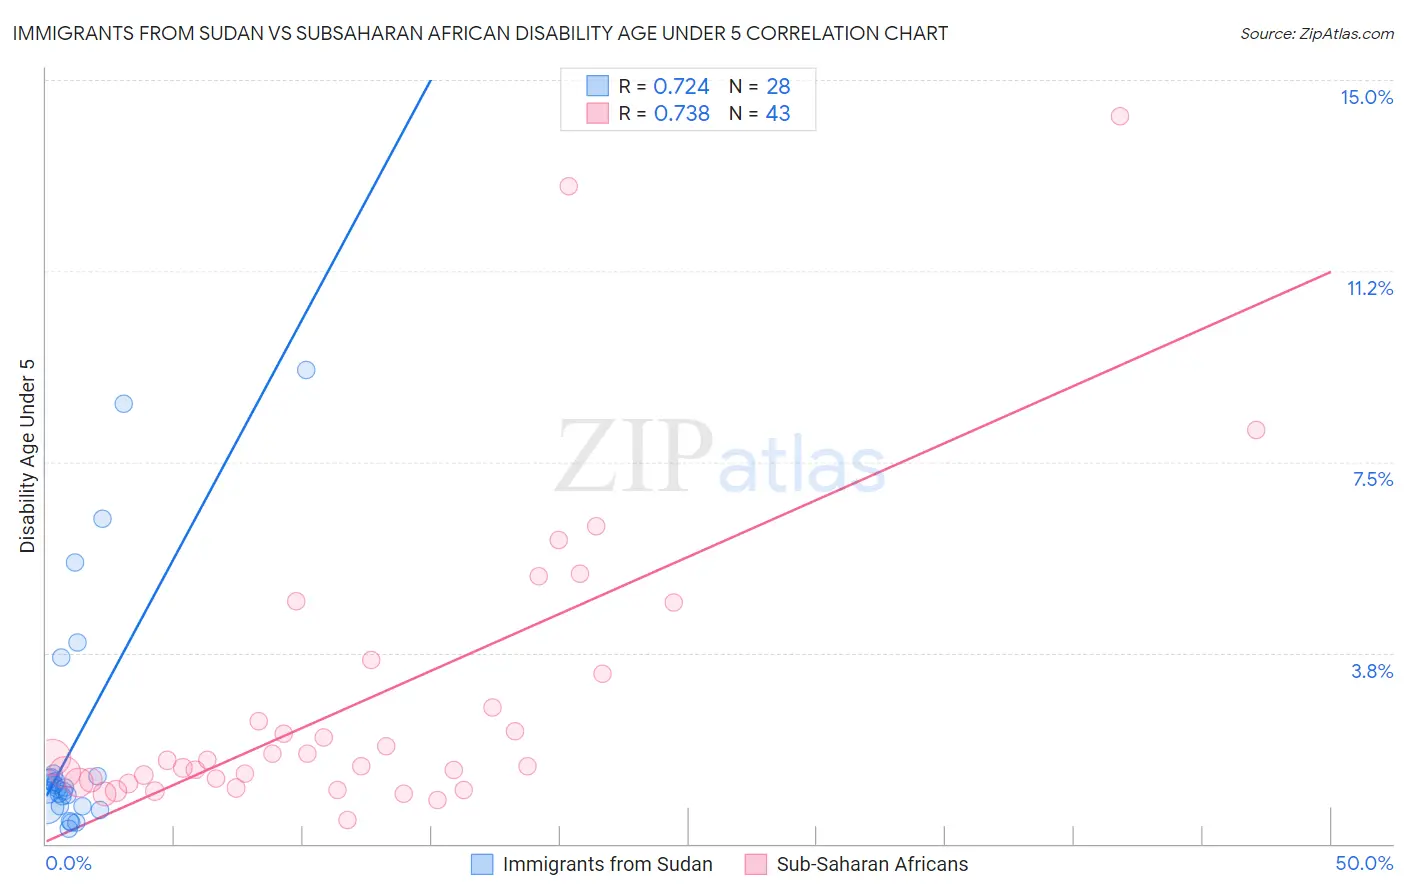 Immigrants from Sudan vs Subsaharan African Disability Age Under 5